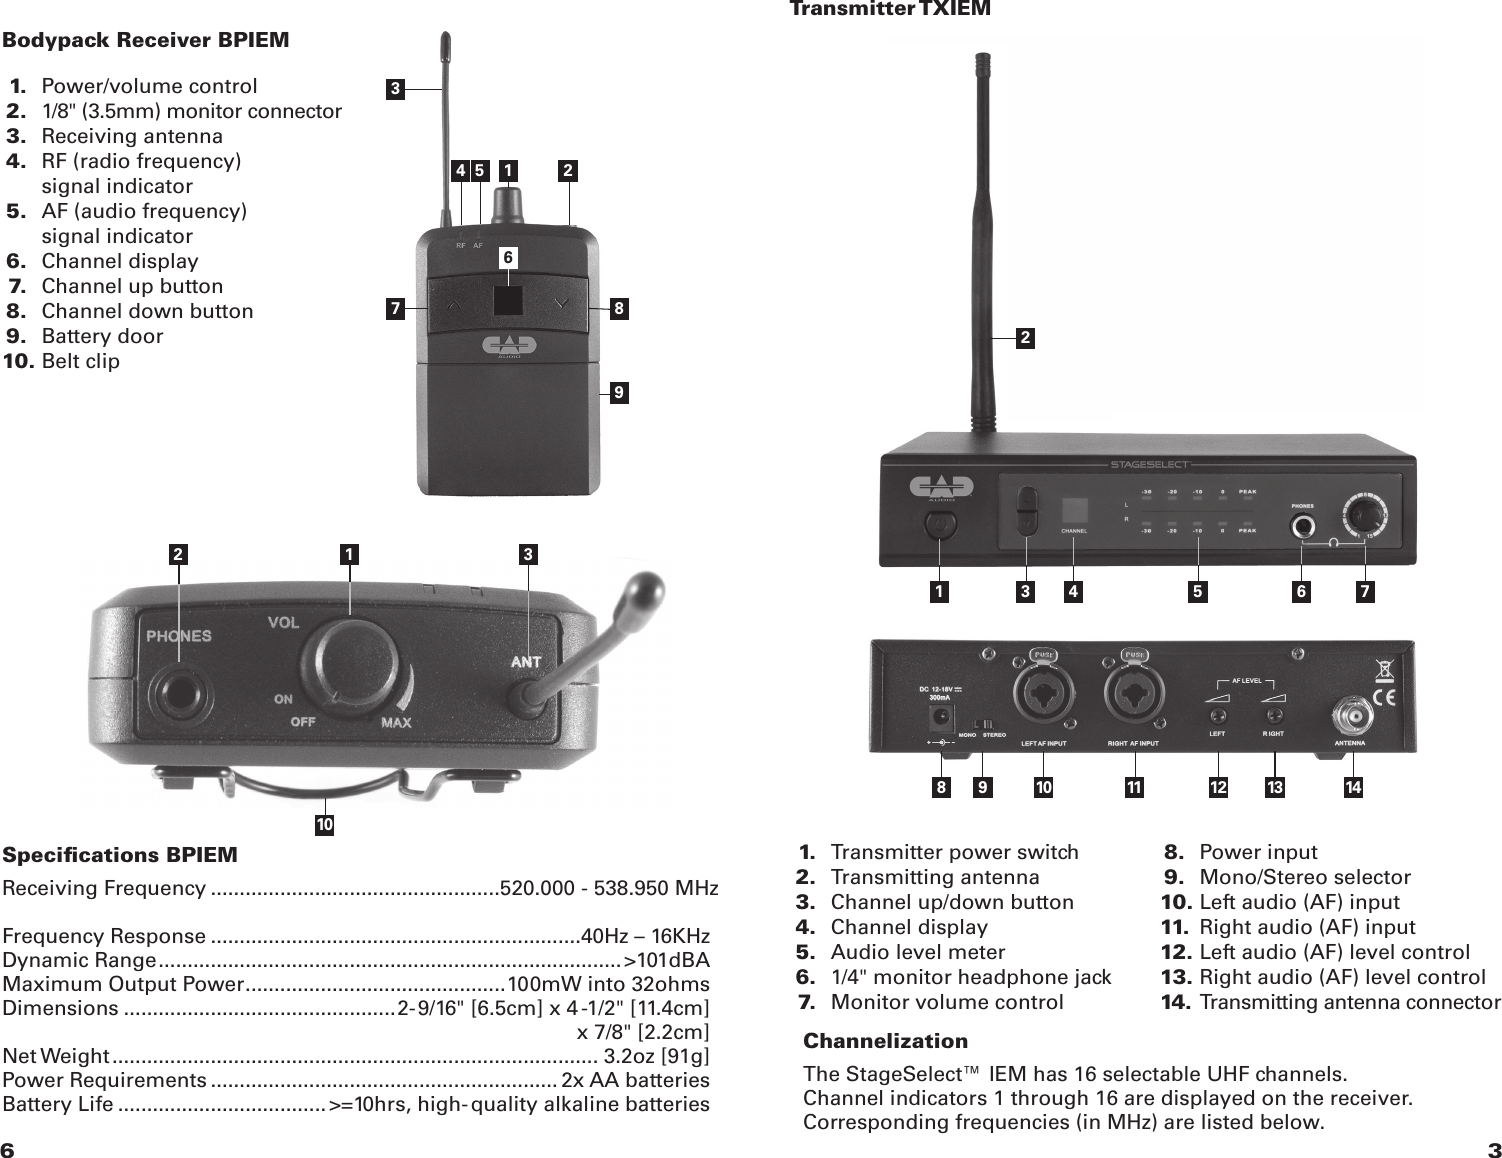 36 1. Transmitter power switch 2. Transmitting antenna 3. Channel up/down button 4. Channel display 5. Audio level meter 6. 1/4&quot; monitor headphone jack 7. Monitor volume control 8. Power input 9. Mono/Stereo selector 10. Left audio (AF) input 11. Right audio (AF) input 12. Left audio (AF) level control 13. Right audio (AF) level control14. Transmitting antenna connector21 3 4 5 6 7Transmitter TXIEMBodypack Receiver BPIEM8 9 10 11 12 13 14Specications BPIEMReceiving Frequency ..................................................520.000 - 538.950 MHz   Frequency Response ................................................................40Hz – 16KHzDynamic Range ................................................................................ &gt;101dBAMaximum Output Power ............................................. 100mW into 32ohmsDimensions ...............................................2-9/16&quot; [6.5cm] x 4-1/2&quot; [11.4cm]    x 7/8&quot; [2.2cm]Net Weight .................................................................................... 3.2oz [91g]Power Requirements ............................................................ 2x AA batteriesBattery Life .................................... &gt;=10hrs, high-quality alkaline batteries34 56789 1.   Power/volume control 2.  1/8&quot; (3.5mm) monitor connector 3.  Receiving antenna 4.  RF (radio frequency)      signal indicator 5.  AF (audio frequency)      signal indicator 6.  Channel display 7.  Channel up button 8.  Channel down button 9.  Battery door 10. Belt clip1 21012 3ChannelizationThe StageSelect™ IEM has 16 selectable UHF channels.Channel indicators 1 through 16 are displayed on the receiver. Corresponding frequencies (in MHz) are listed below.